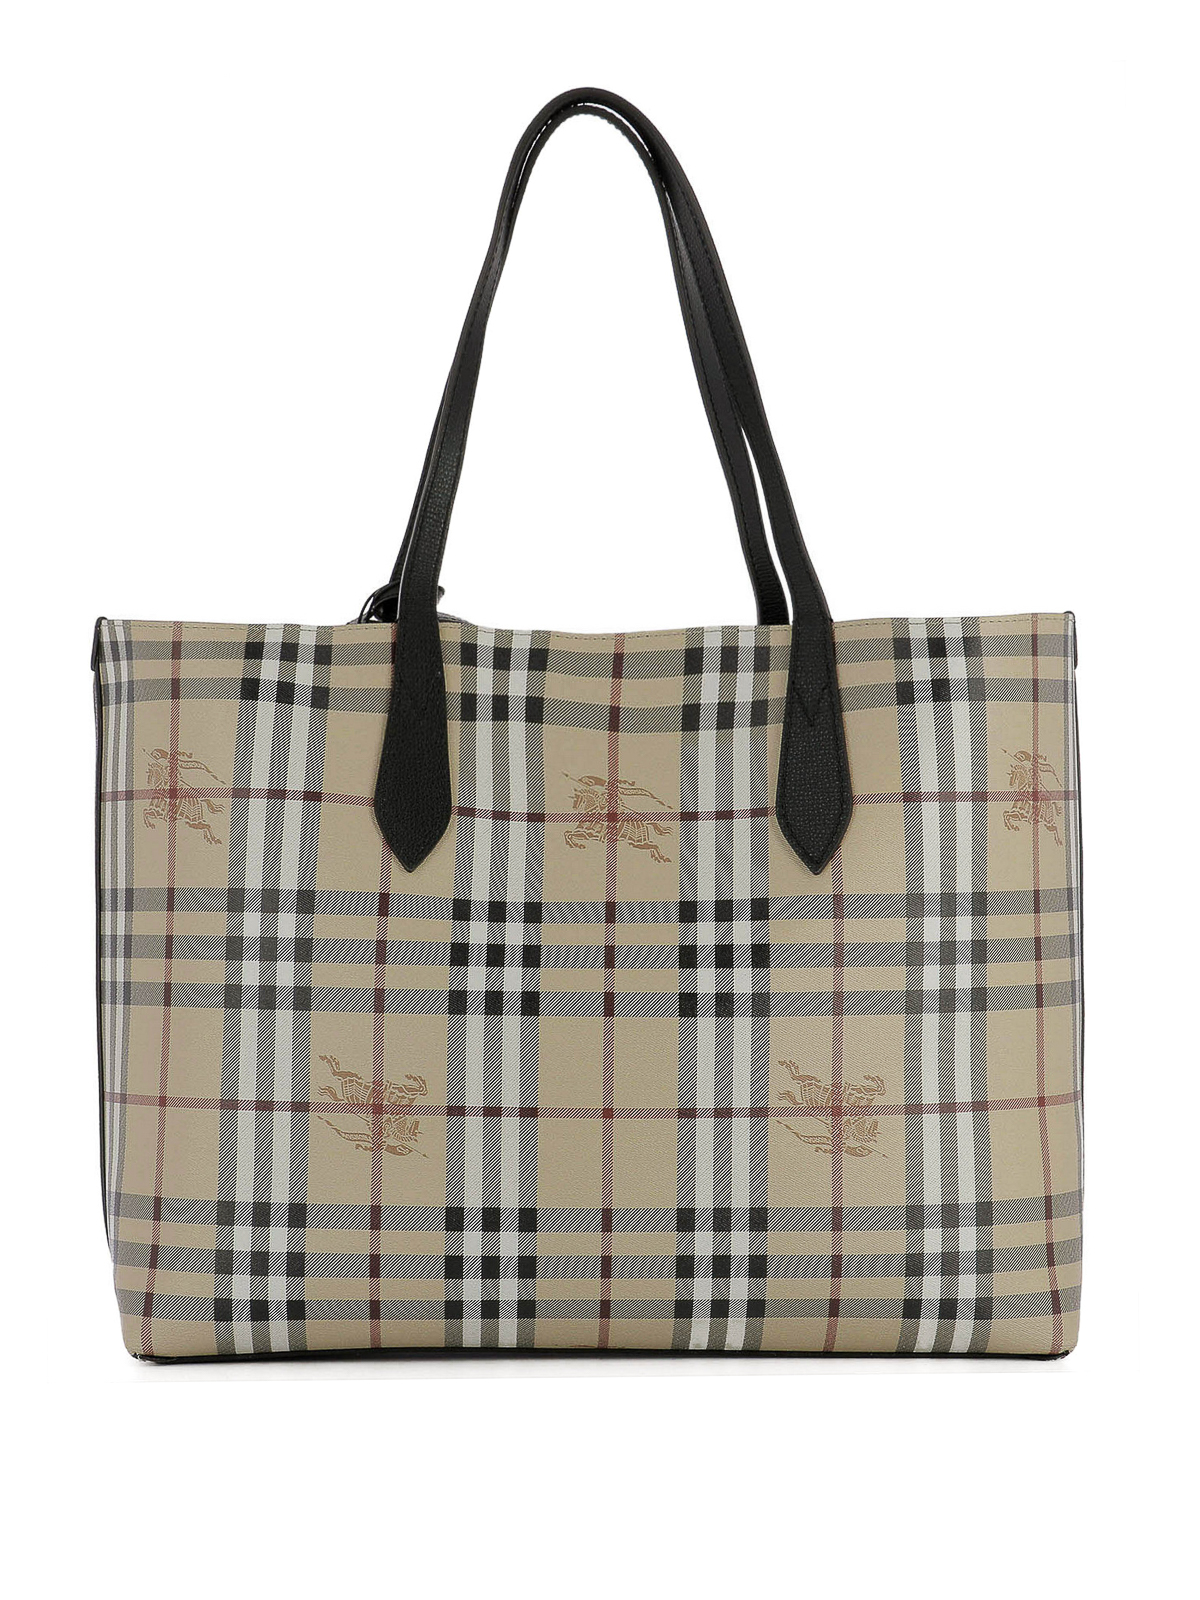 Burberry - Leather medium reversible tote - totes bags - 4049635